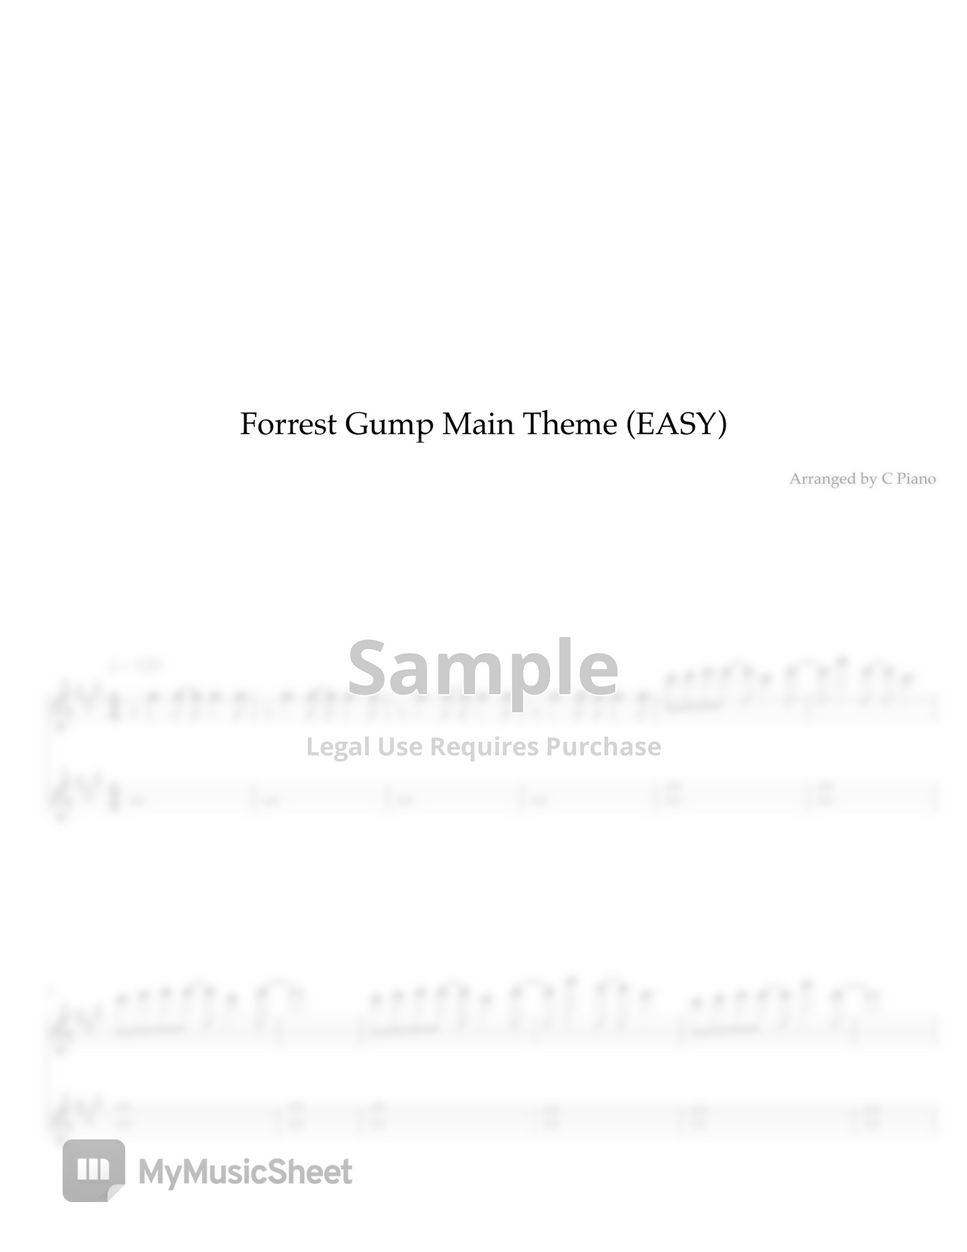 Alan Silvestri - Forrest Gump Main Theme (Easy Version) by C Piano